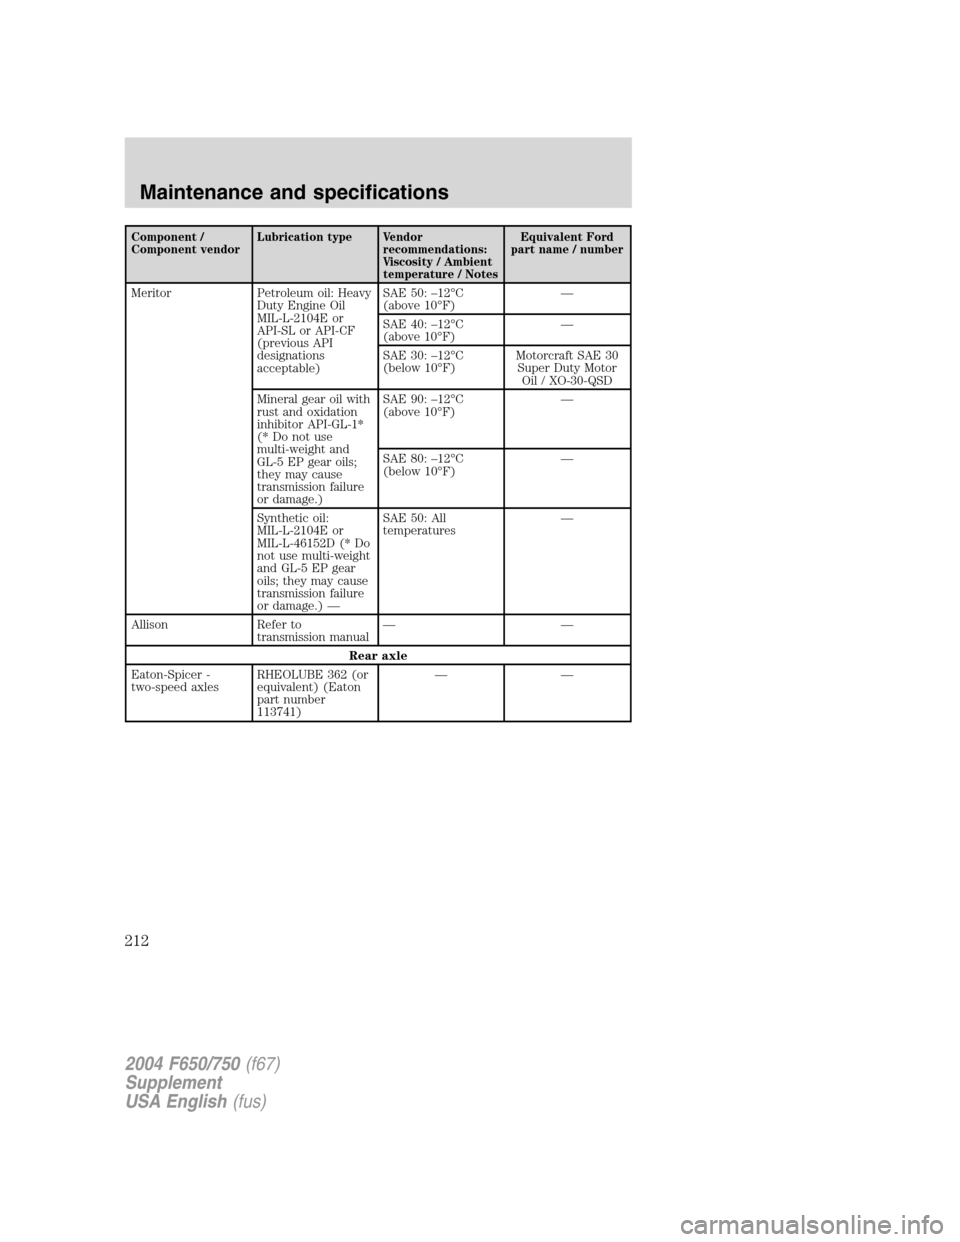 FORD F650 2004 11.G Owners Manual Component /
Component vendorLubrication type Vendor
recommendations:
Viscosity / Ambient
temperature / NotesEquivalent Ford
part name / number
Meritor Petroleum oil: Heavy
Duty Engine Oil
MIL-L-2104E 